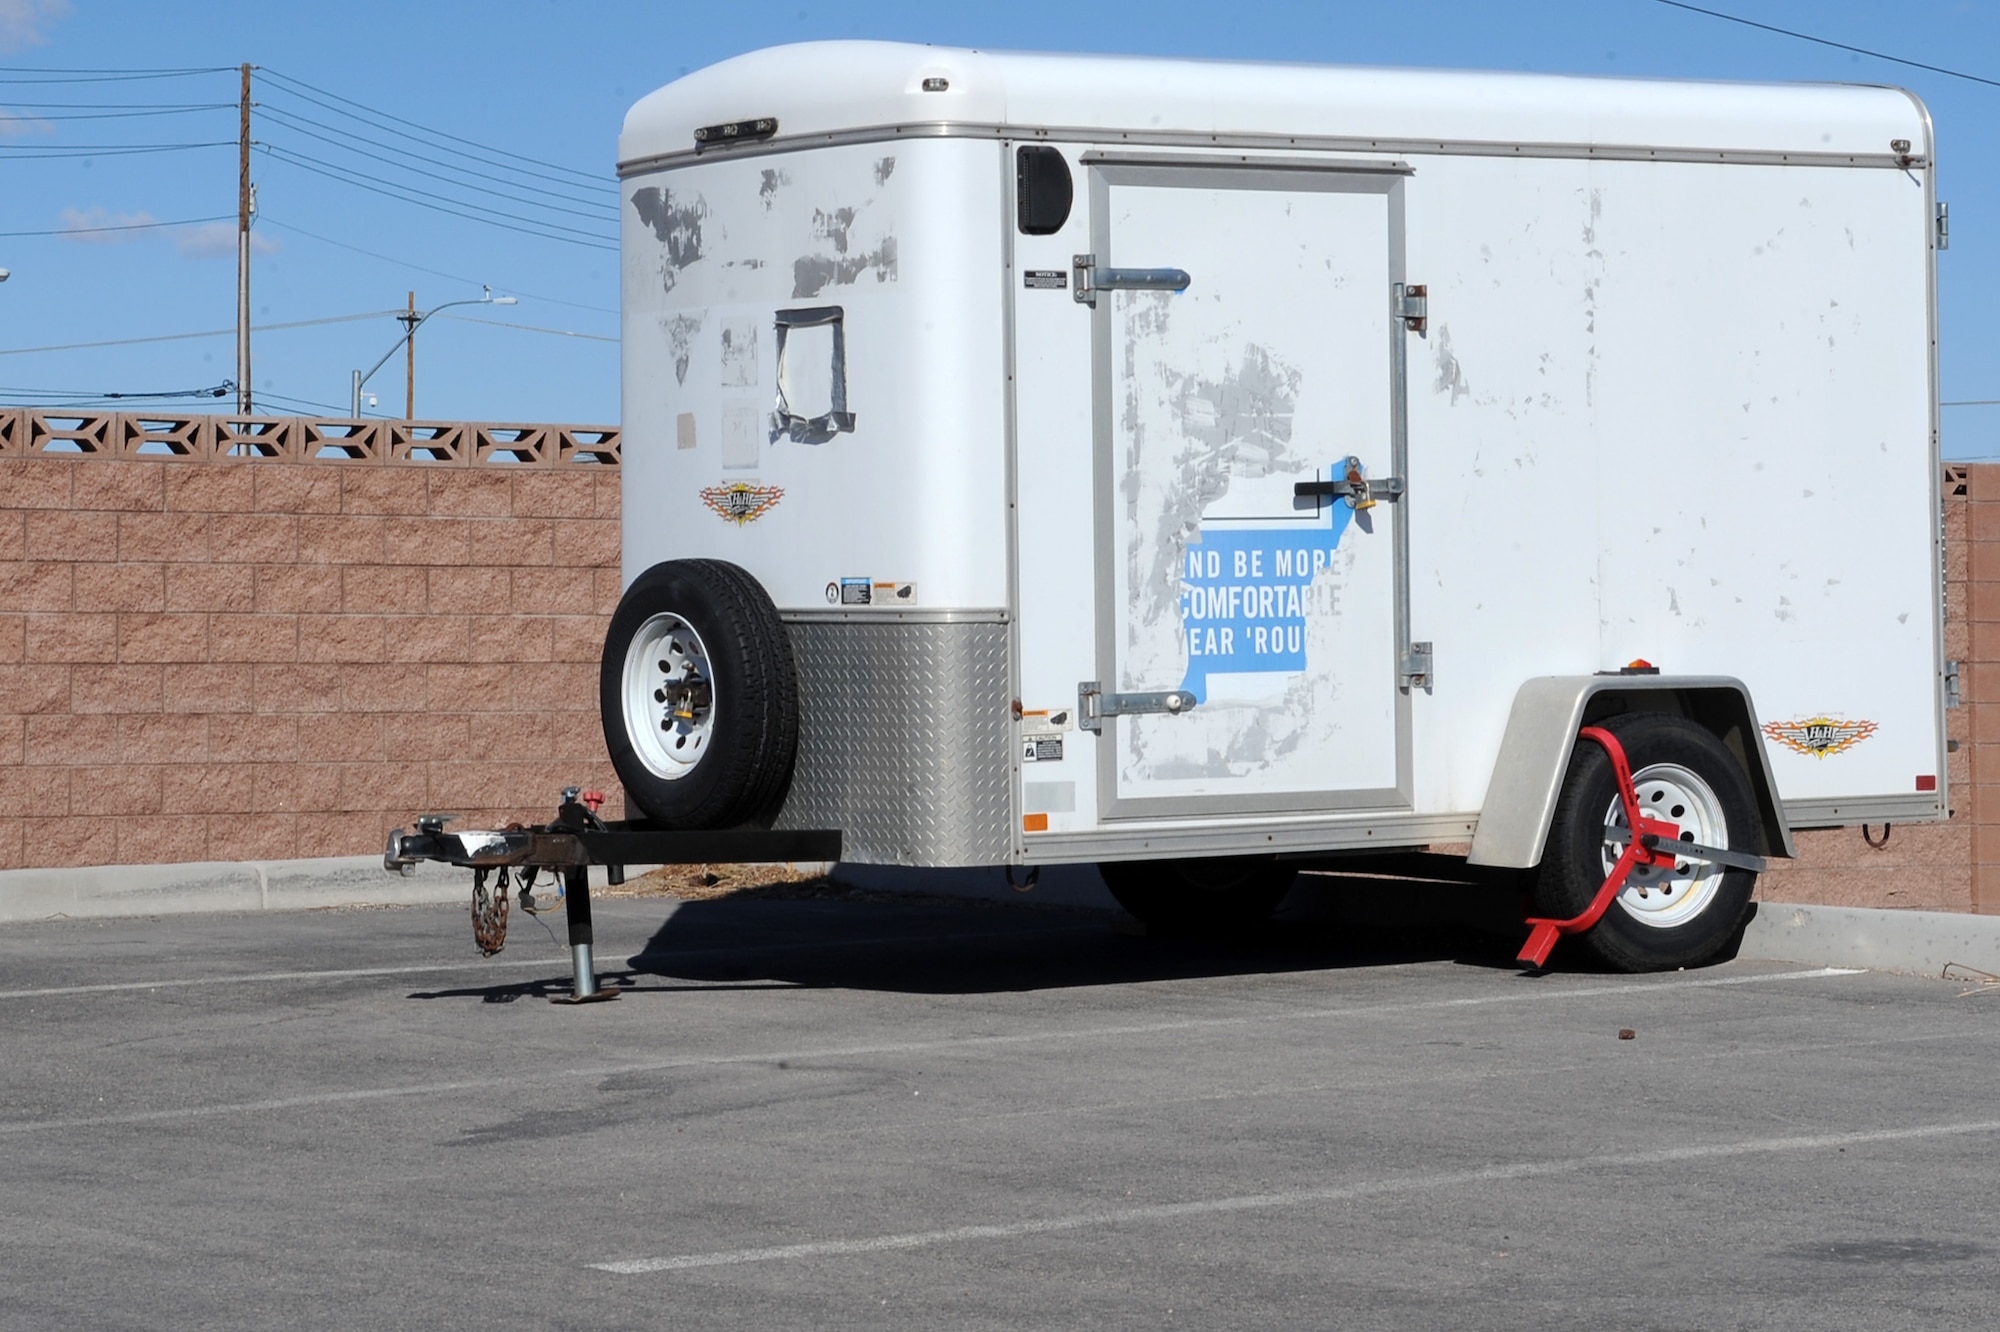 99th Security Forces Squadron booted this trailer, which is seen parked in a unauthorized parking space here Feb. 16th, 2012 at Nellis Air Force Base, Nev. Security Forces will tow (at the owner's expense), impound, and possibly dispose of any vehicles or recreational equipment that are improperly parked or abandoned. (U.S. Air Force photo by Senior Airman Jack Sanders)